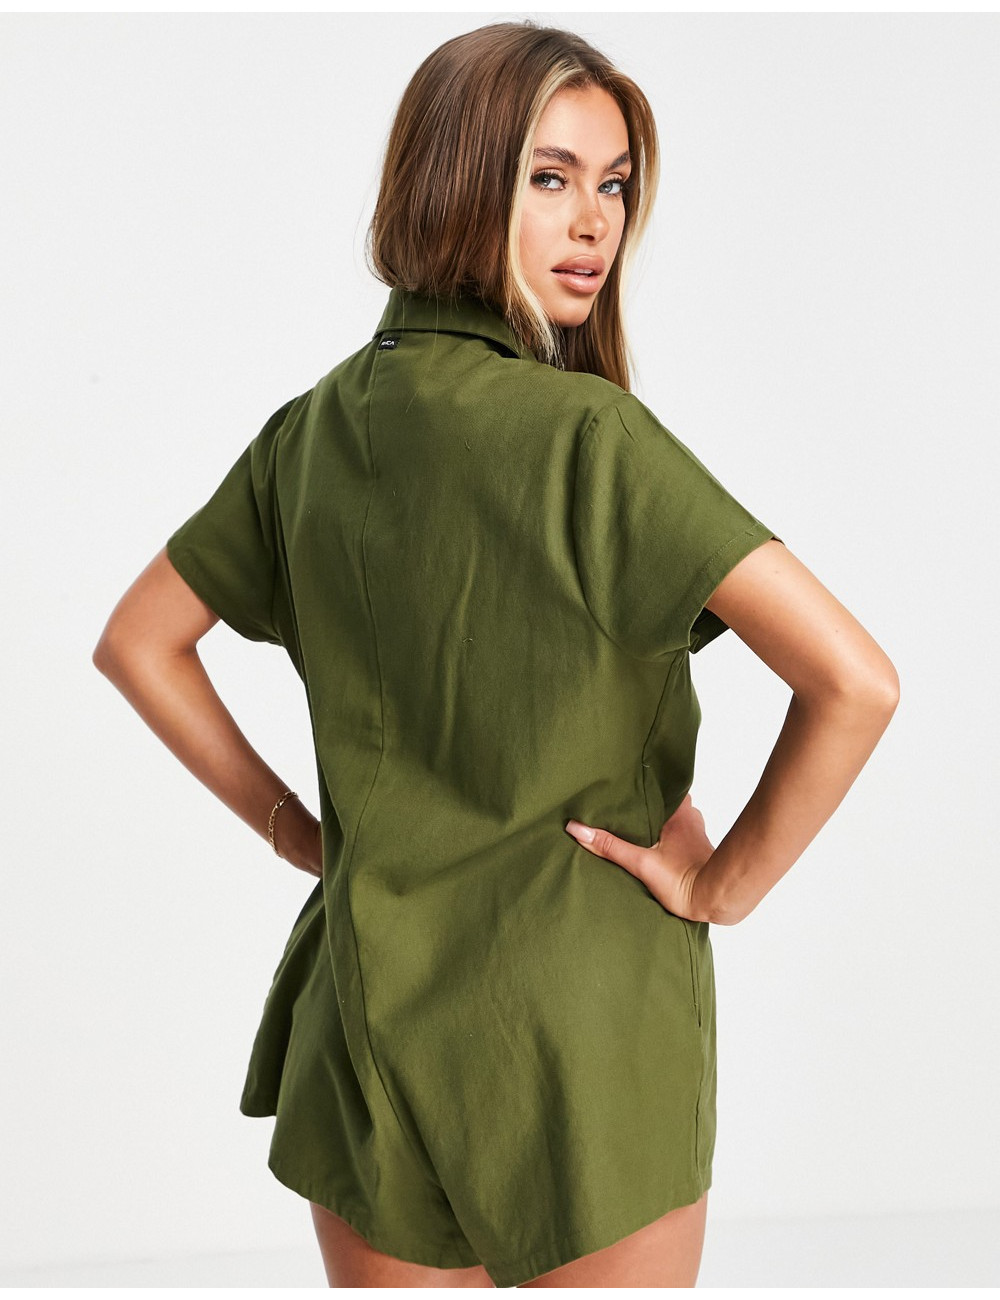 RVCA Go Green playsuit in...